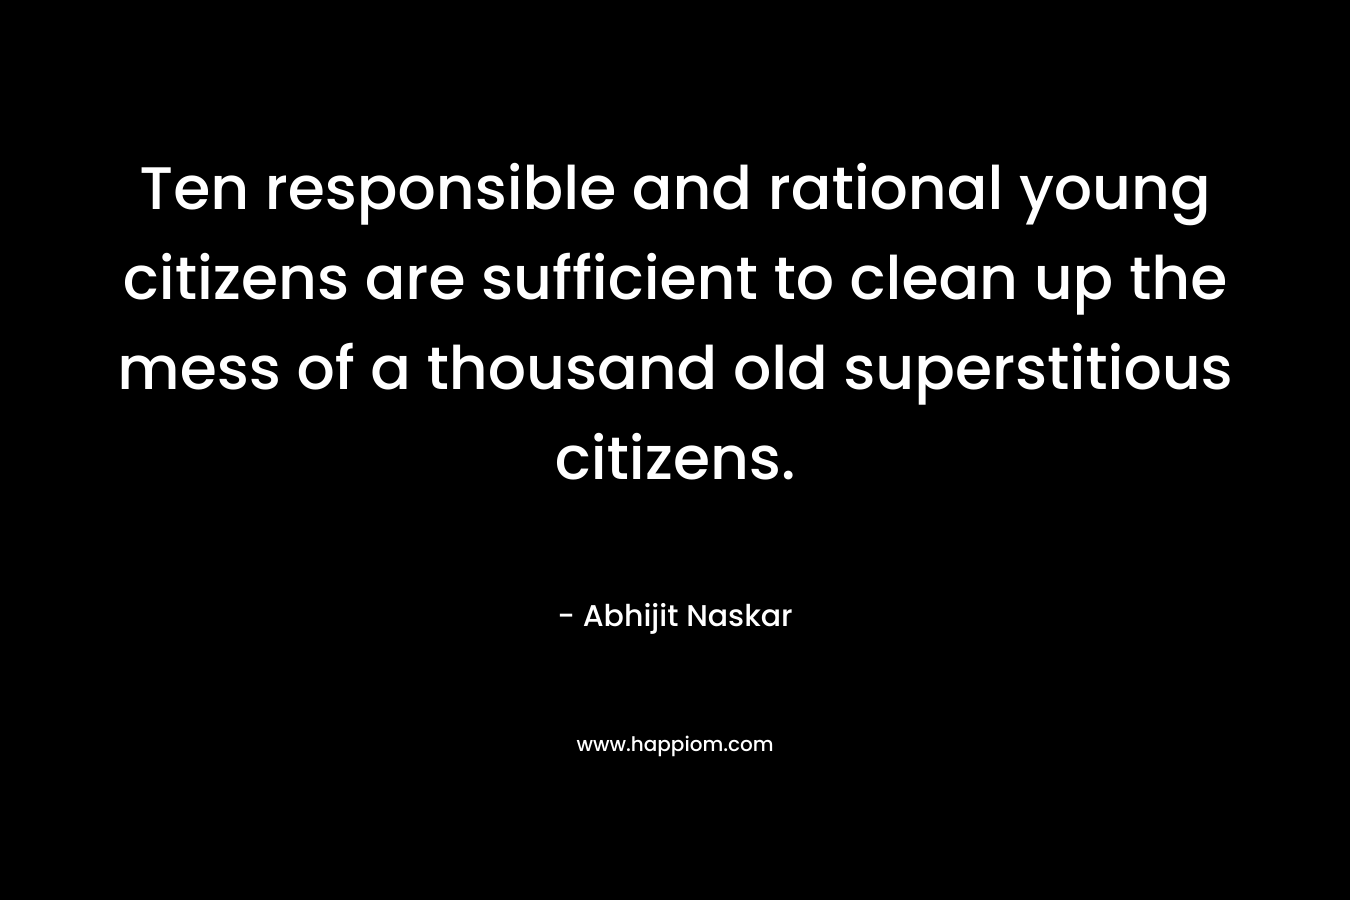 Ten responsible and rational young citizens are sufficient to clean up the mess of a thousand old superstitious citizens. – Abhijit Naskar